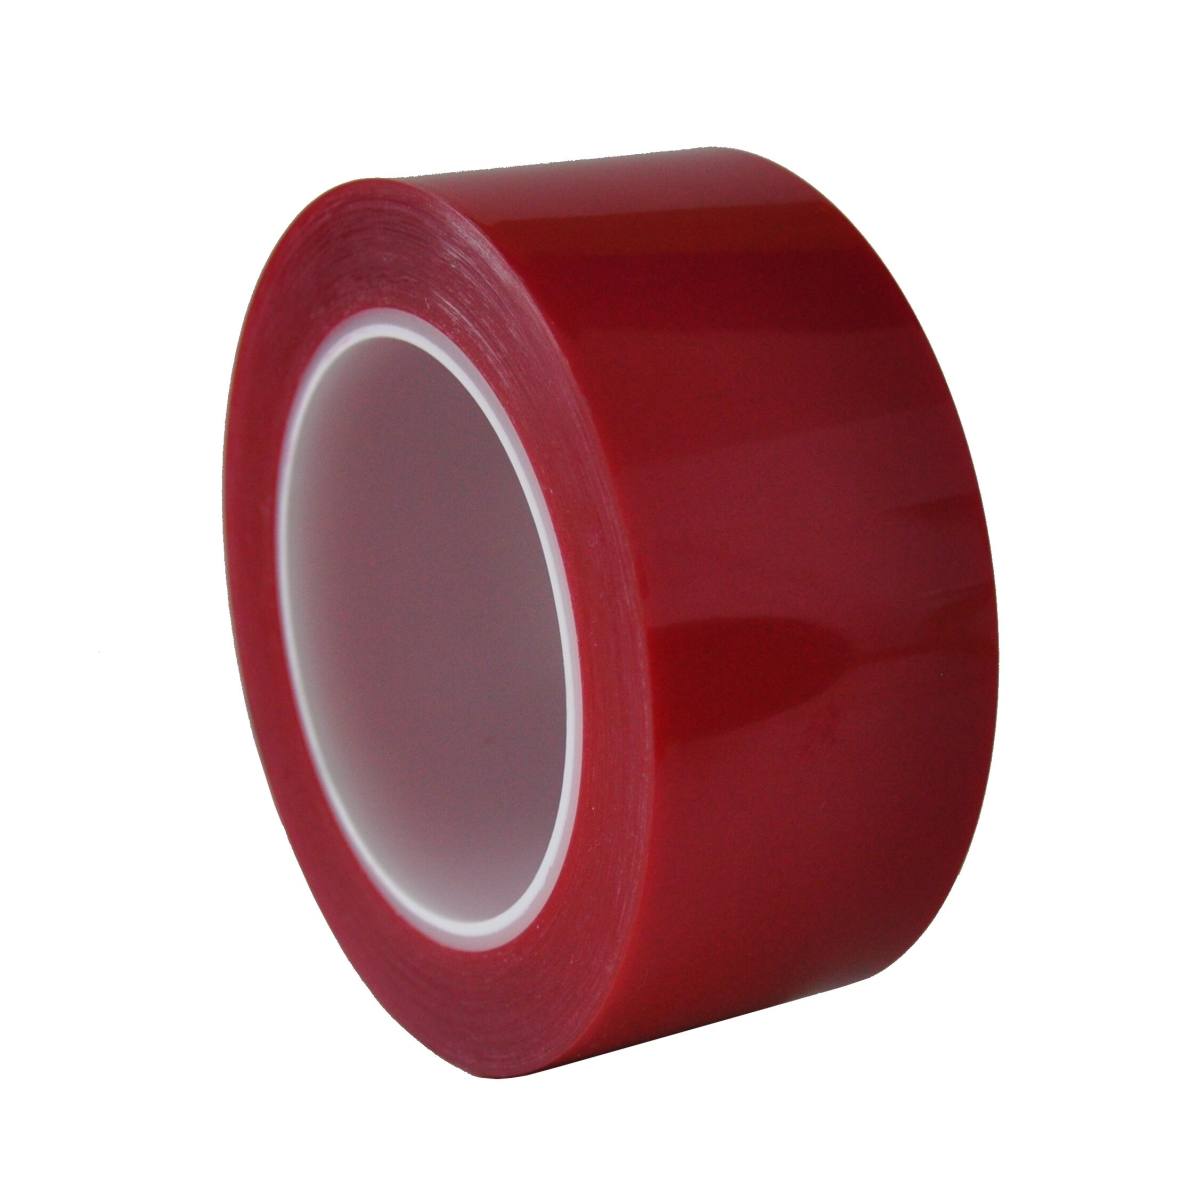 S-K-S 208R polyester adhesive tape, 150mmx66m, red